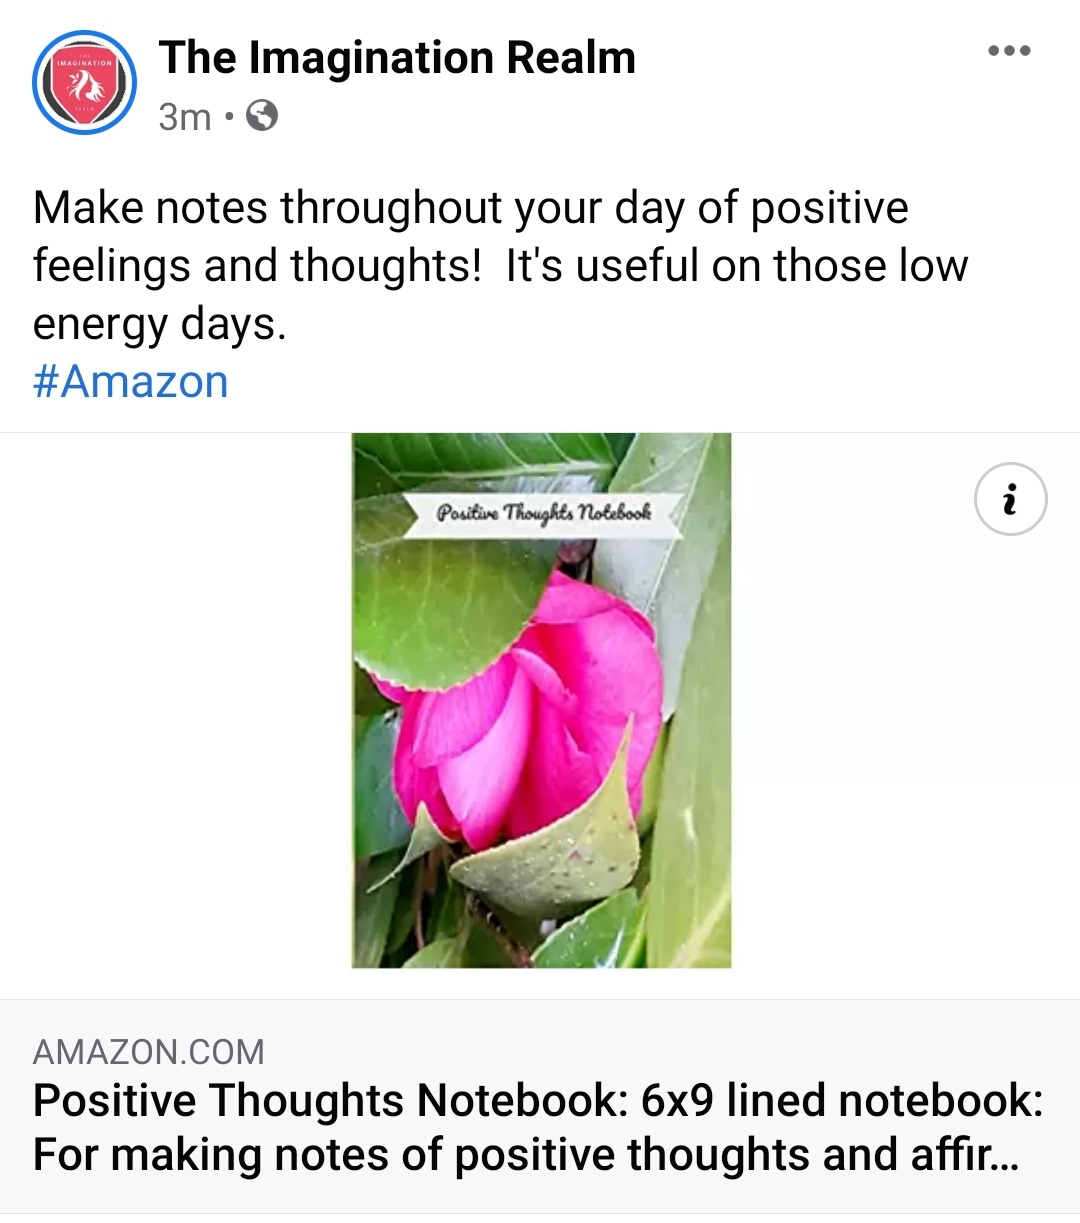 Positive Thoughts Notebook